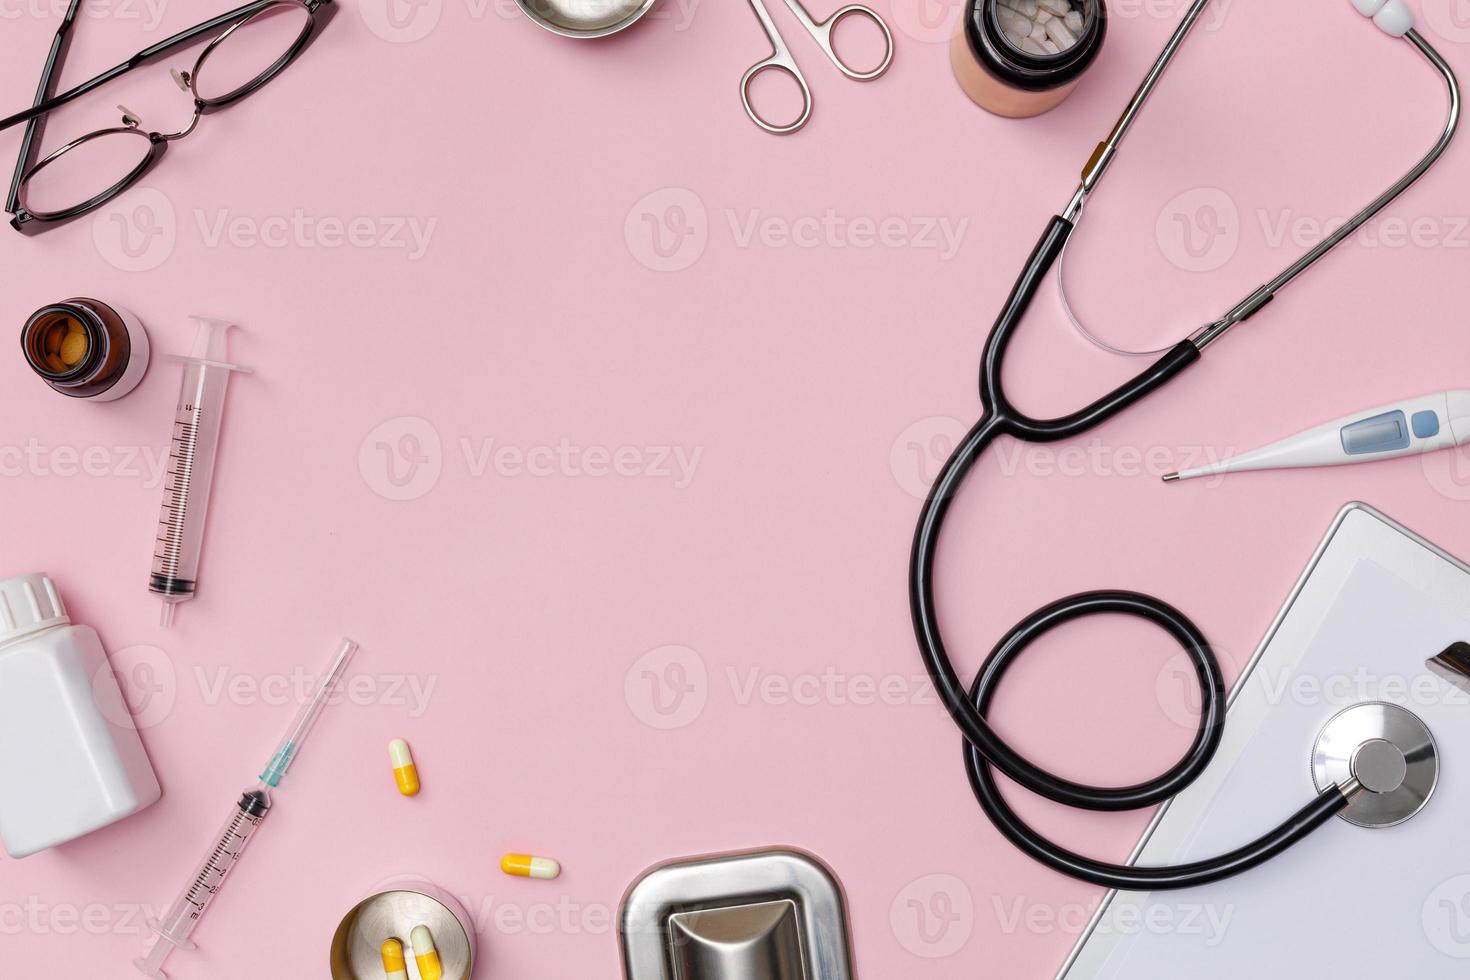 Creative flatlay of doctor medical equipment pink table with stethoscope, medical documents, thermometer, syringe and pills, Health care concept, Top view with copy space, Isolated on pink photo